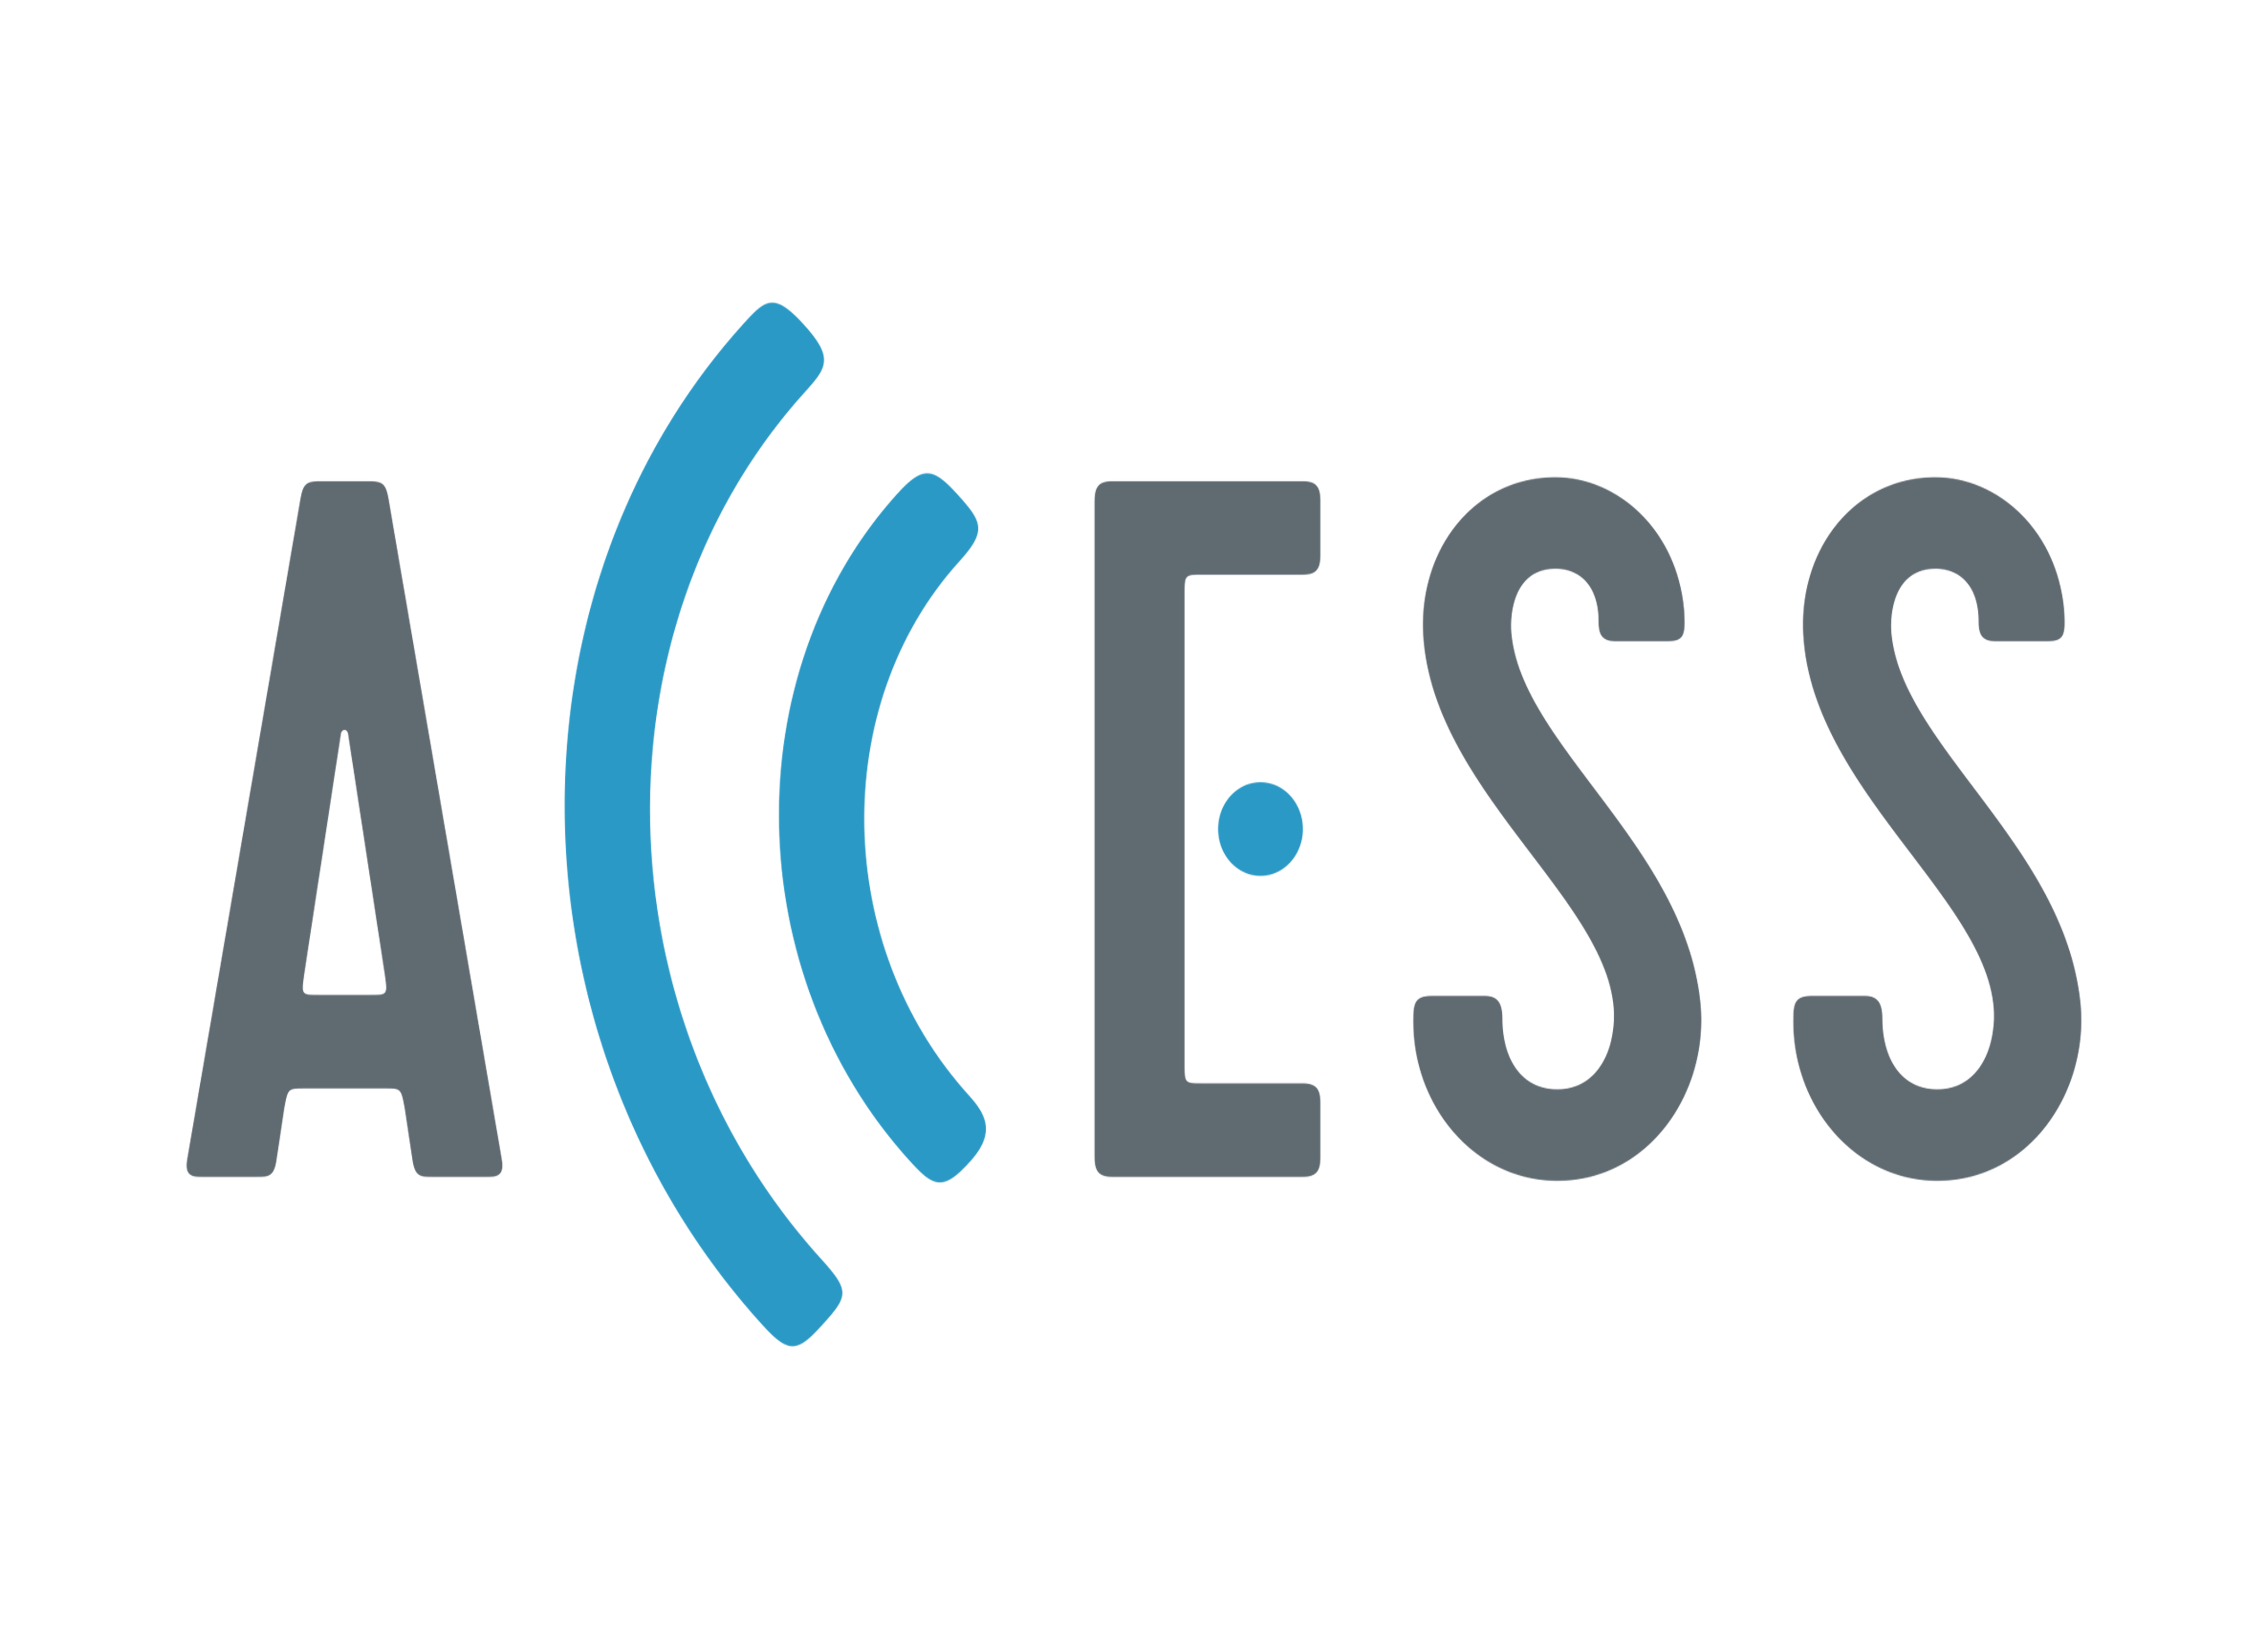 Access Group Solutions